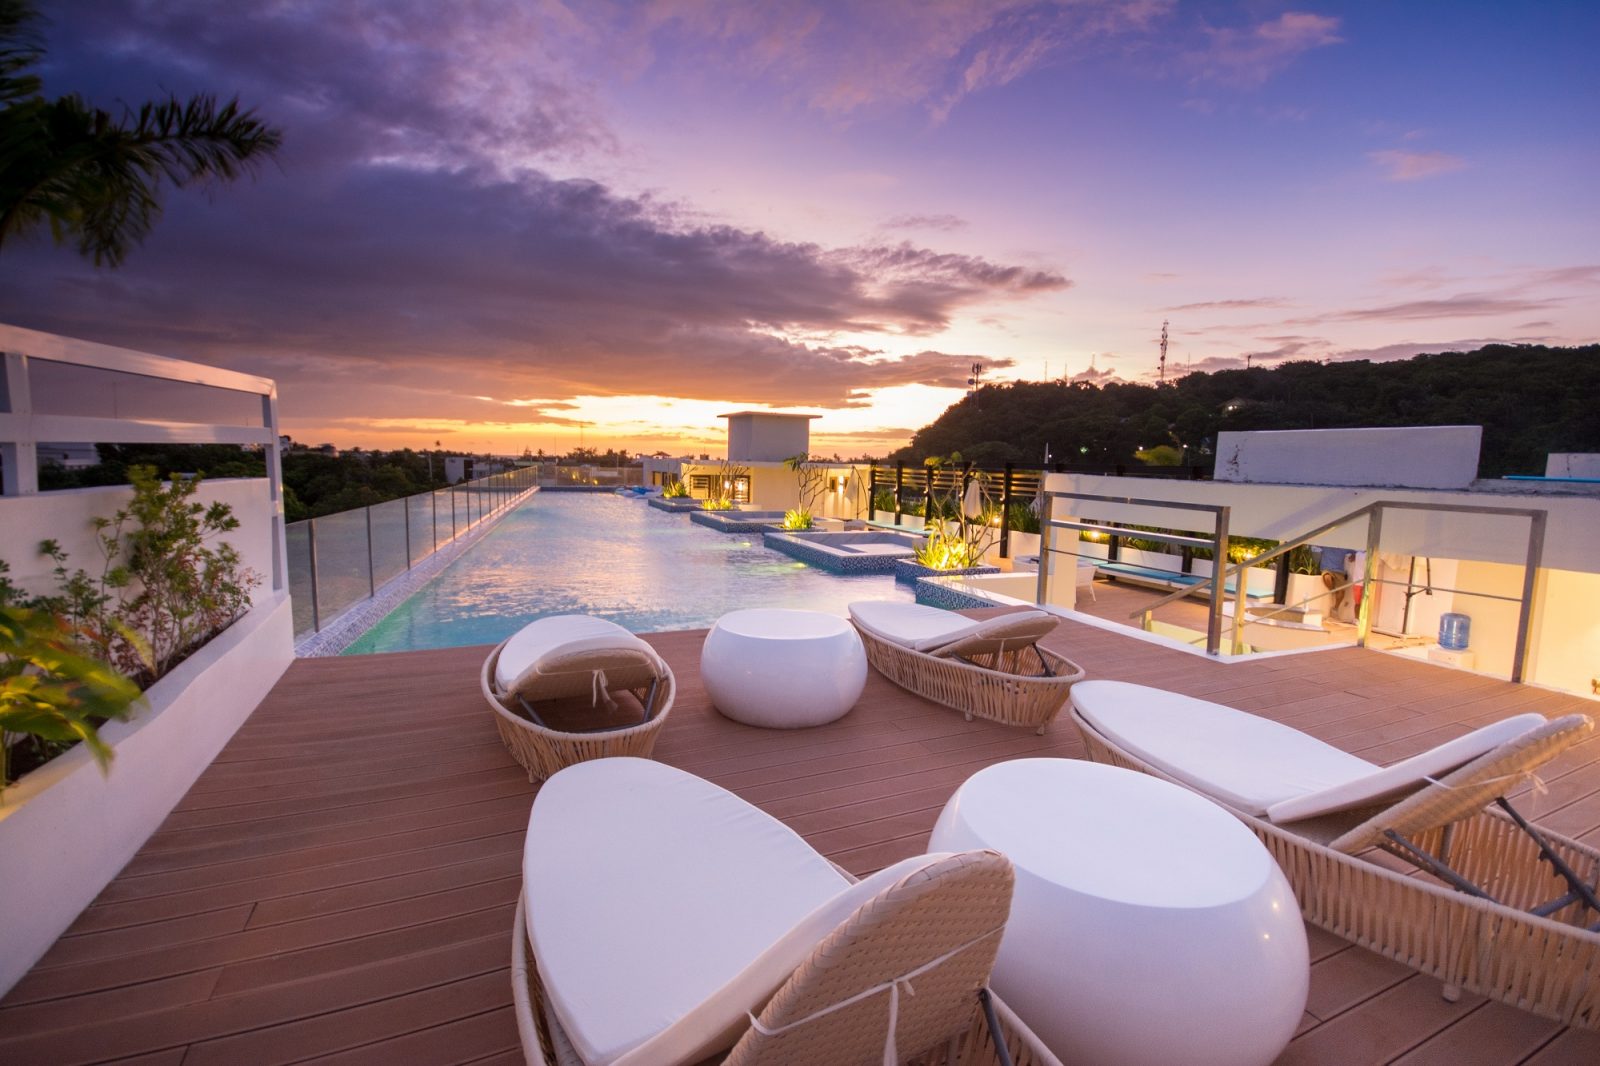 Rooftop swimming pool lit by a beautiful sunset, at Ferra Hotel Boracay